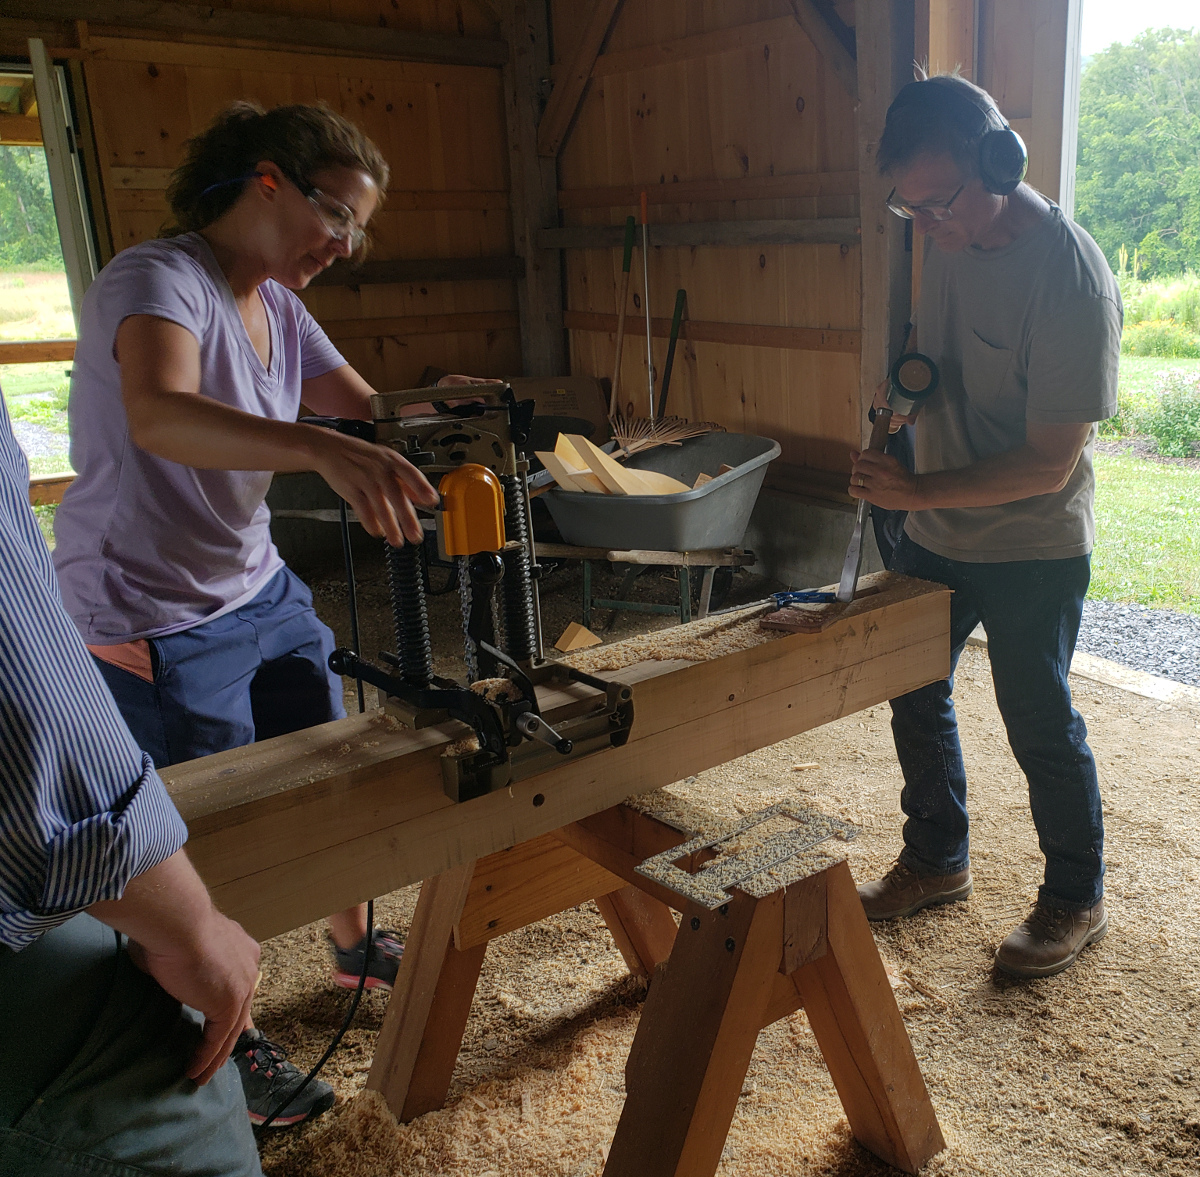 Participants in the FLM Timber Frame Workshop learn and practice the art of timber joinery. Spots are available for the July 2019 class.